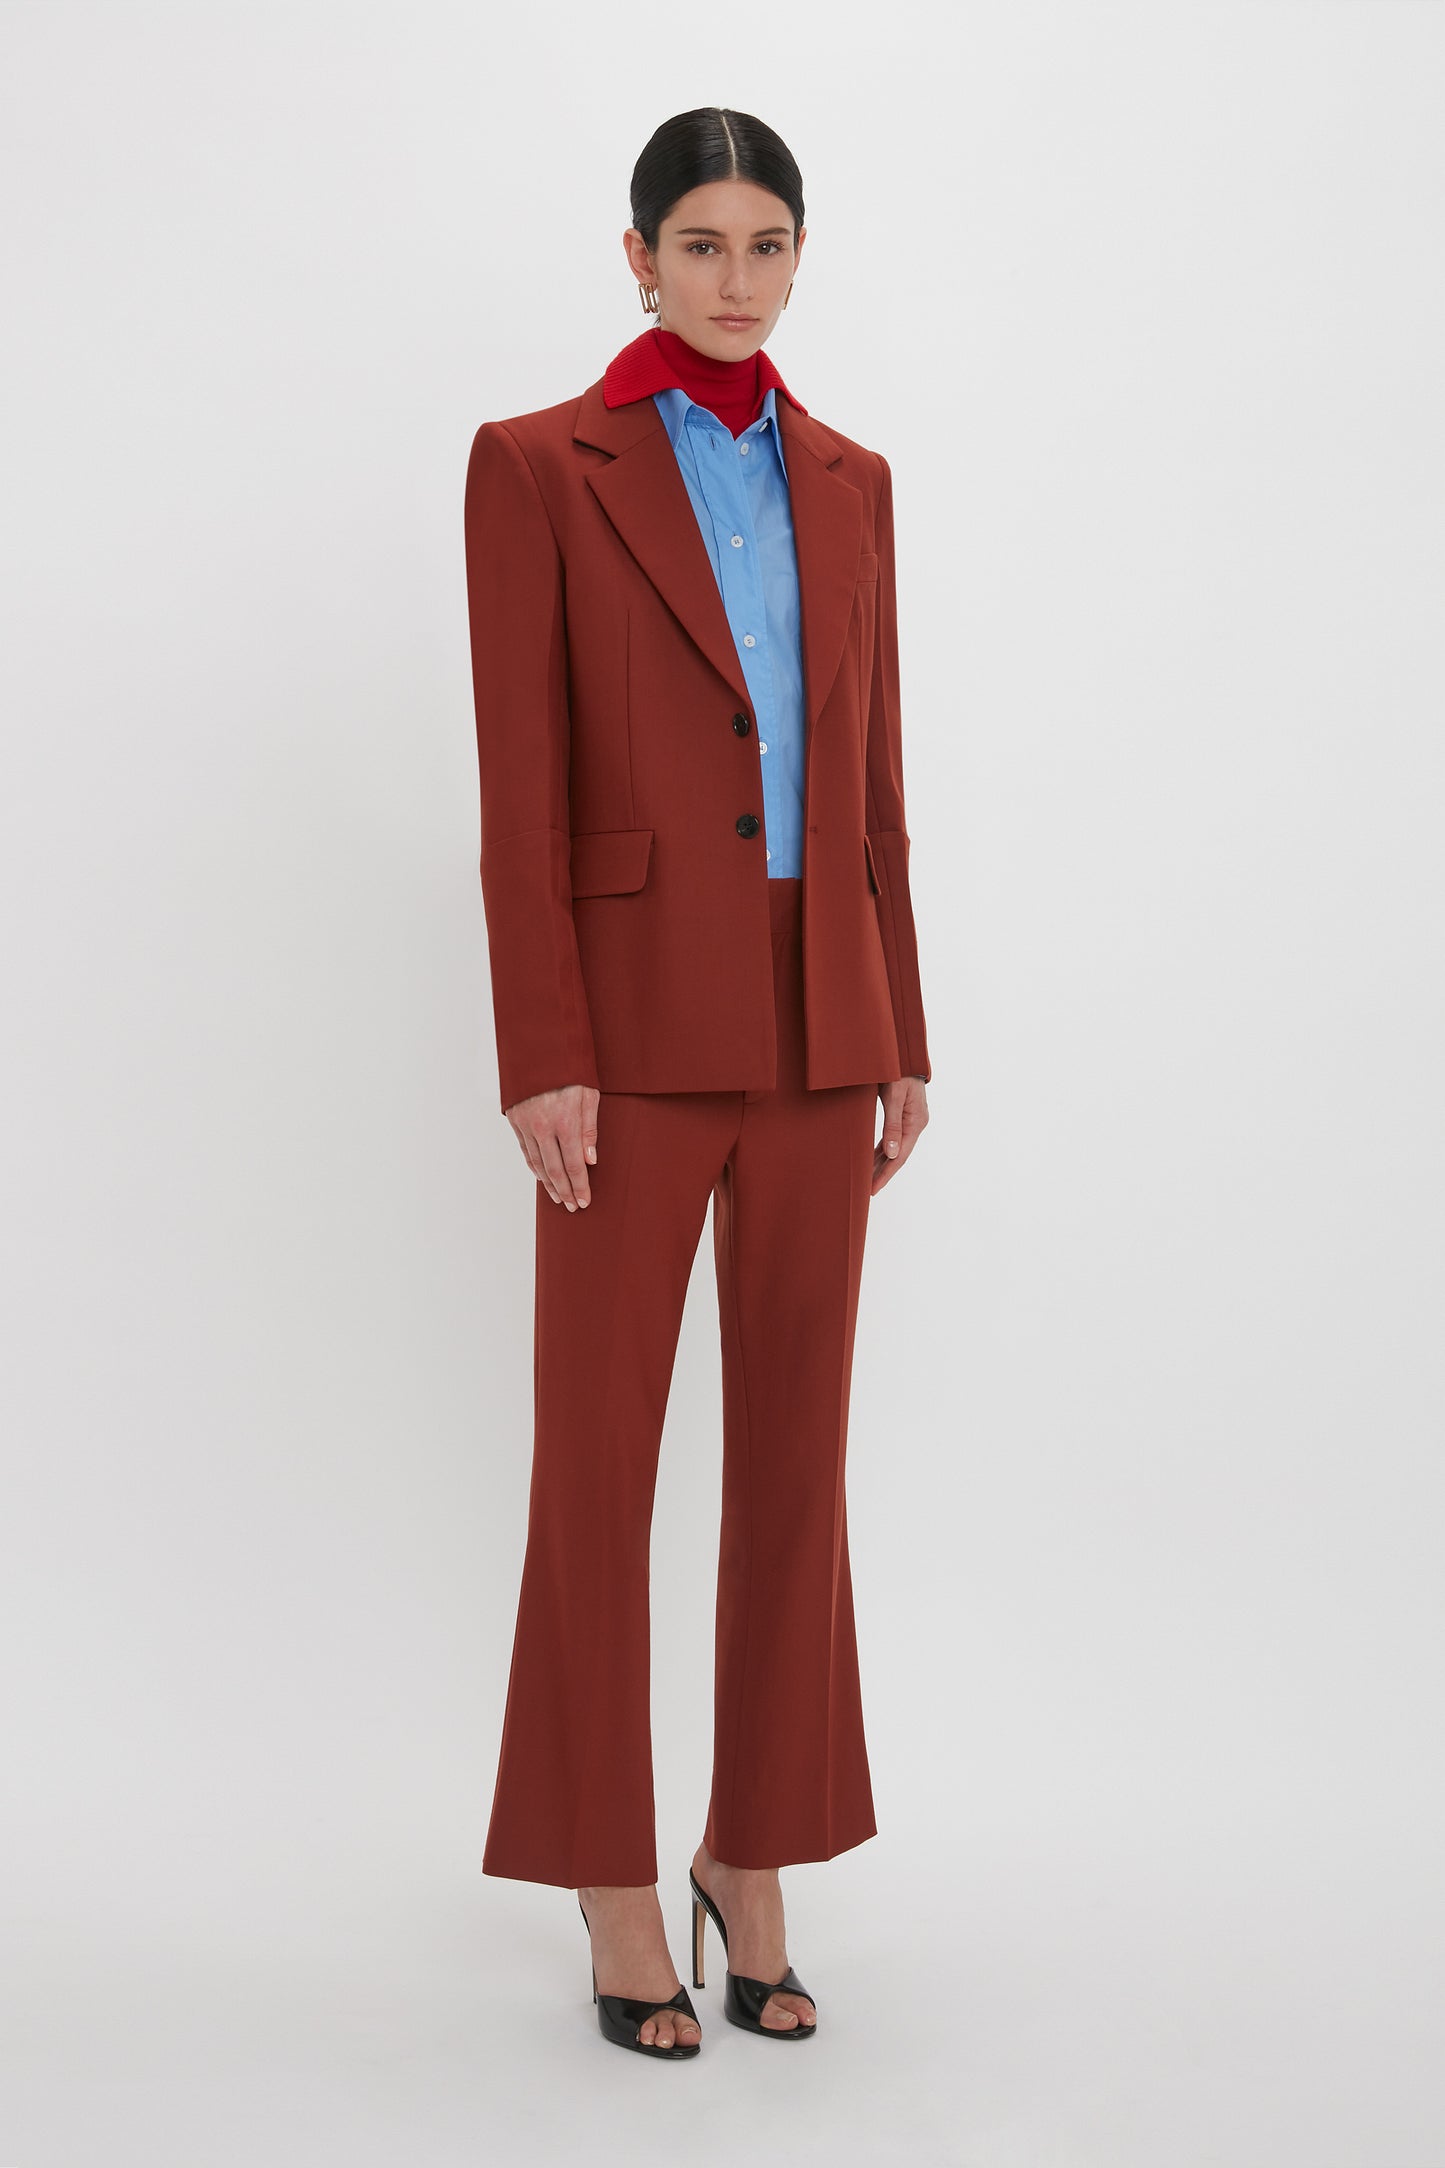 Person standing against a white background wearing the Victoria Beckham Sleeve Detail Patch Pocket Jacket in Russet with contemporary detailing, blue shirt, and red scarf. The person is also wearing black high-heeled sandals and large earrings.